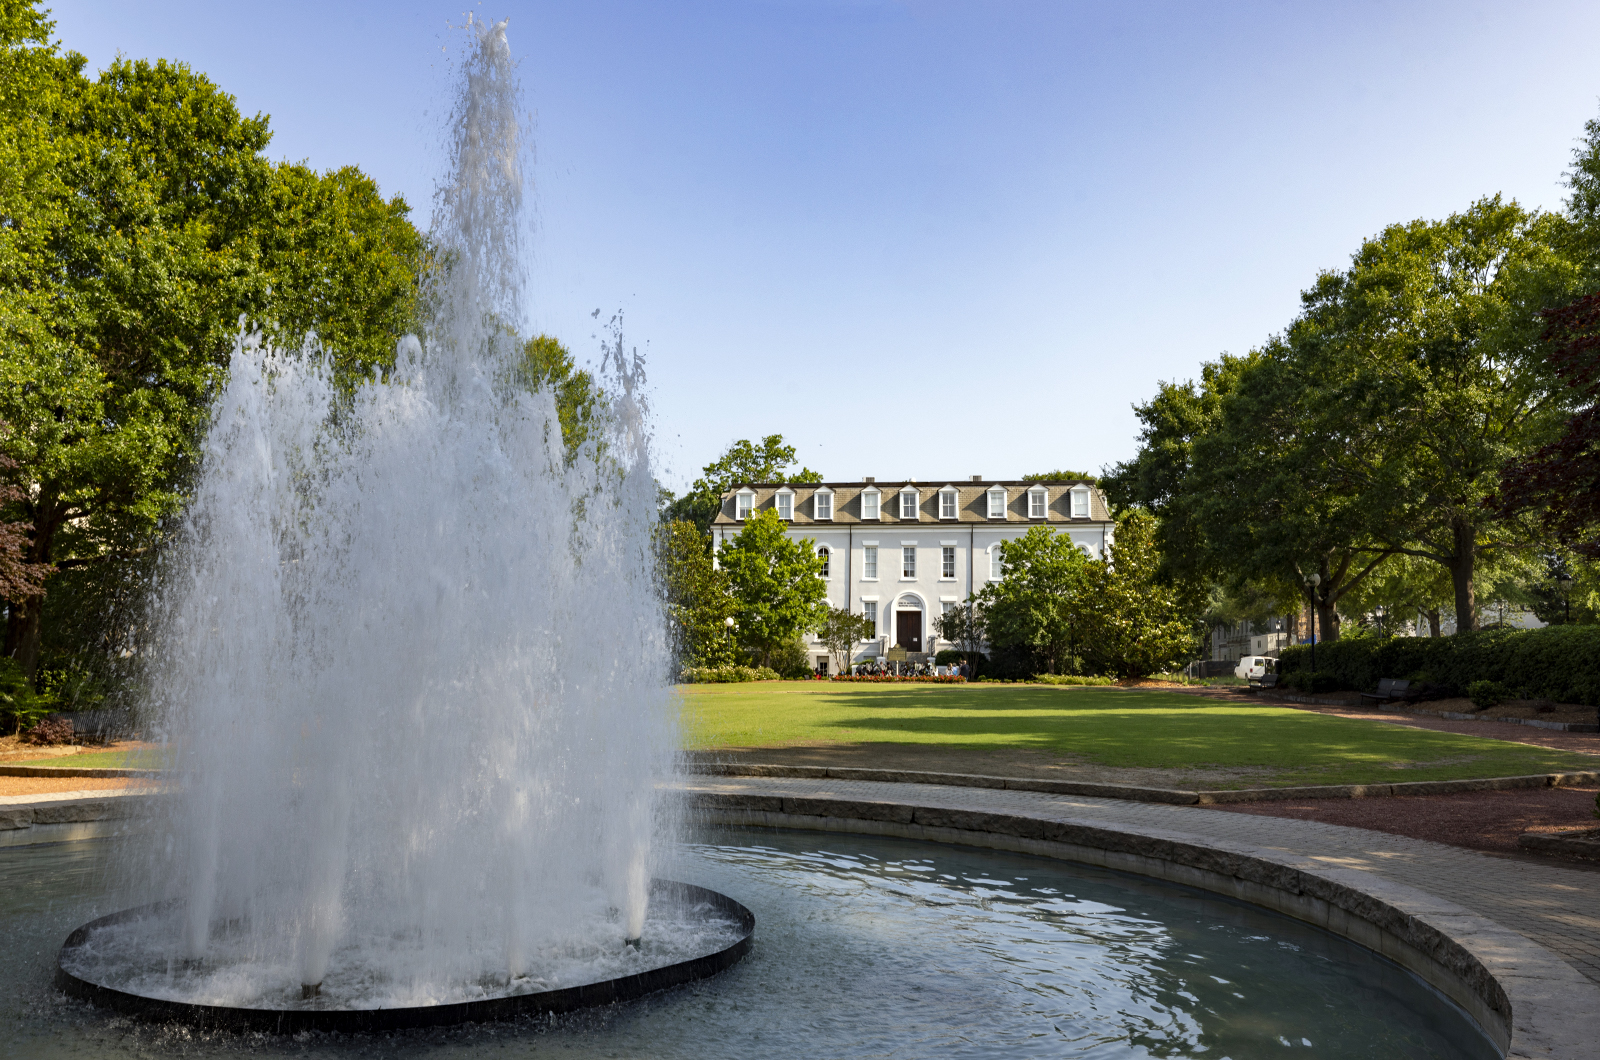 Morehead Honors College named No. 1 in the nation